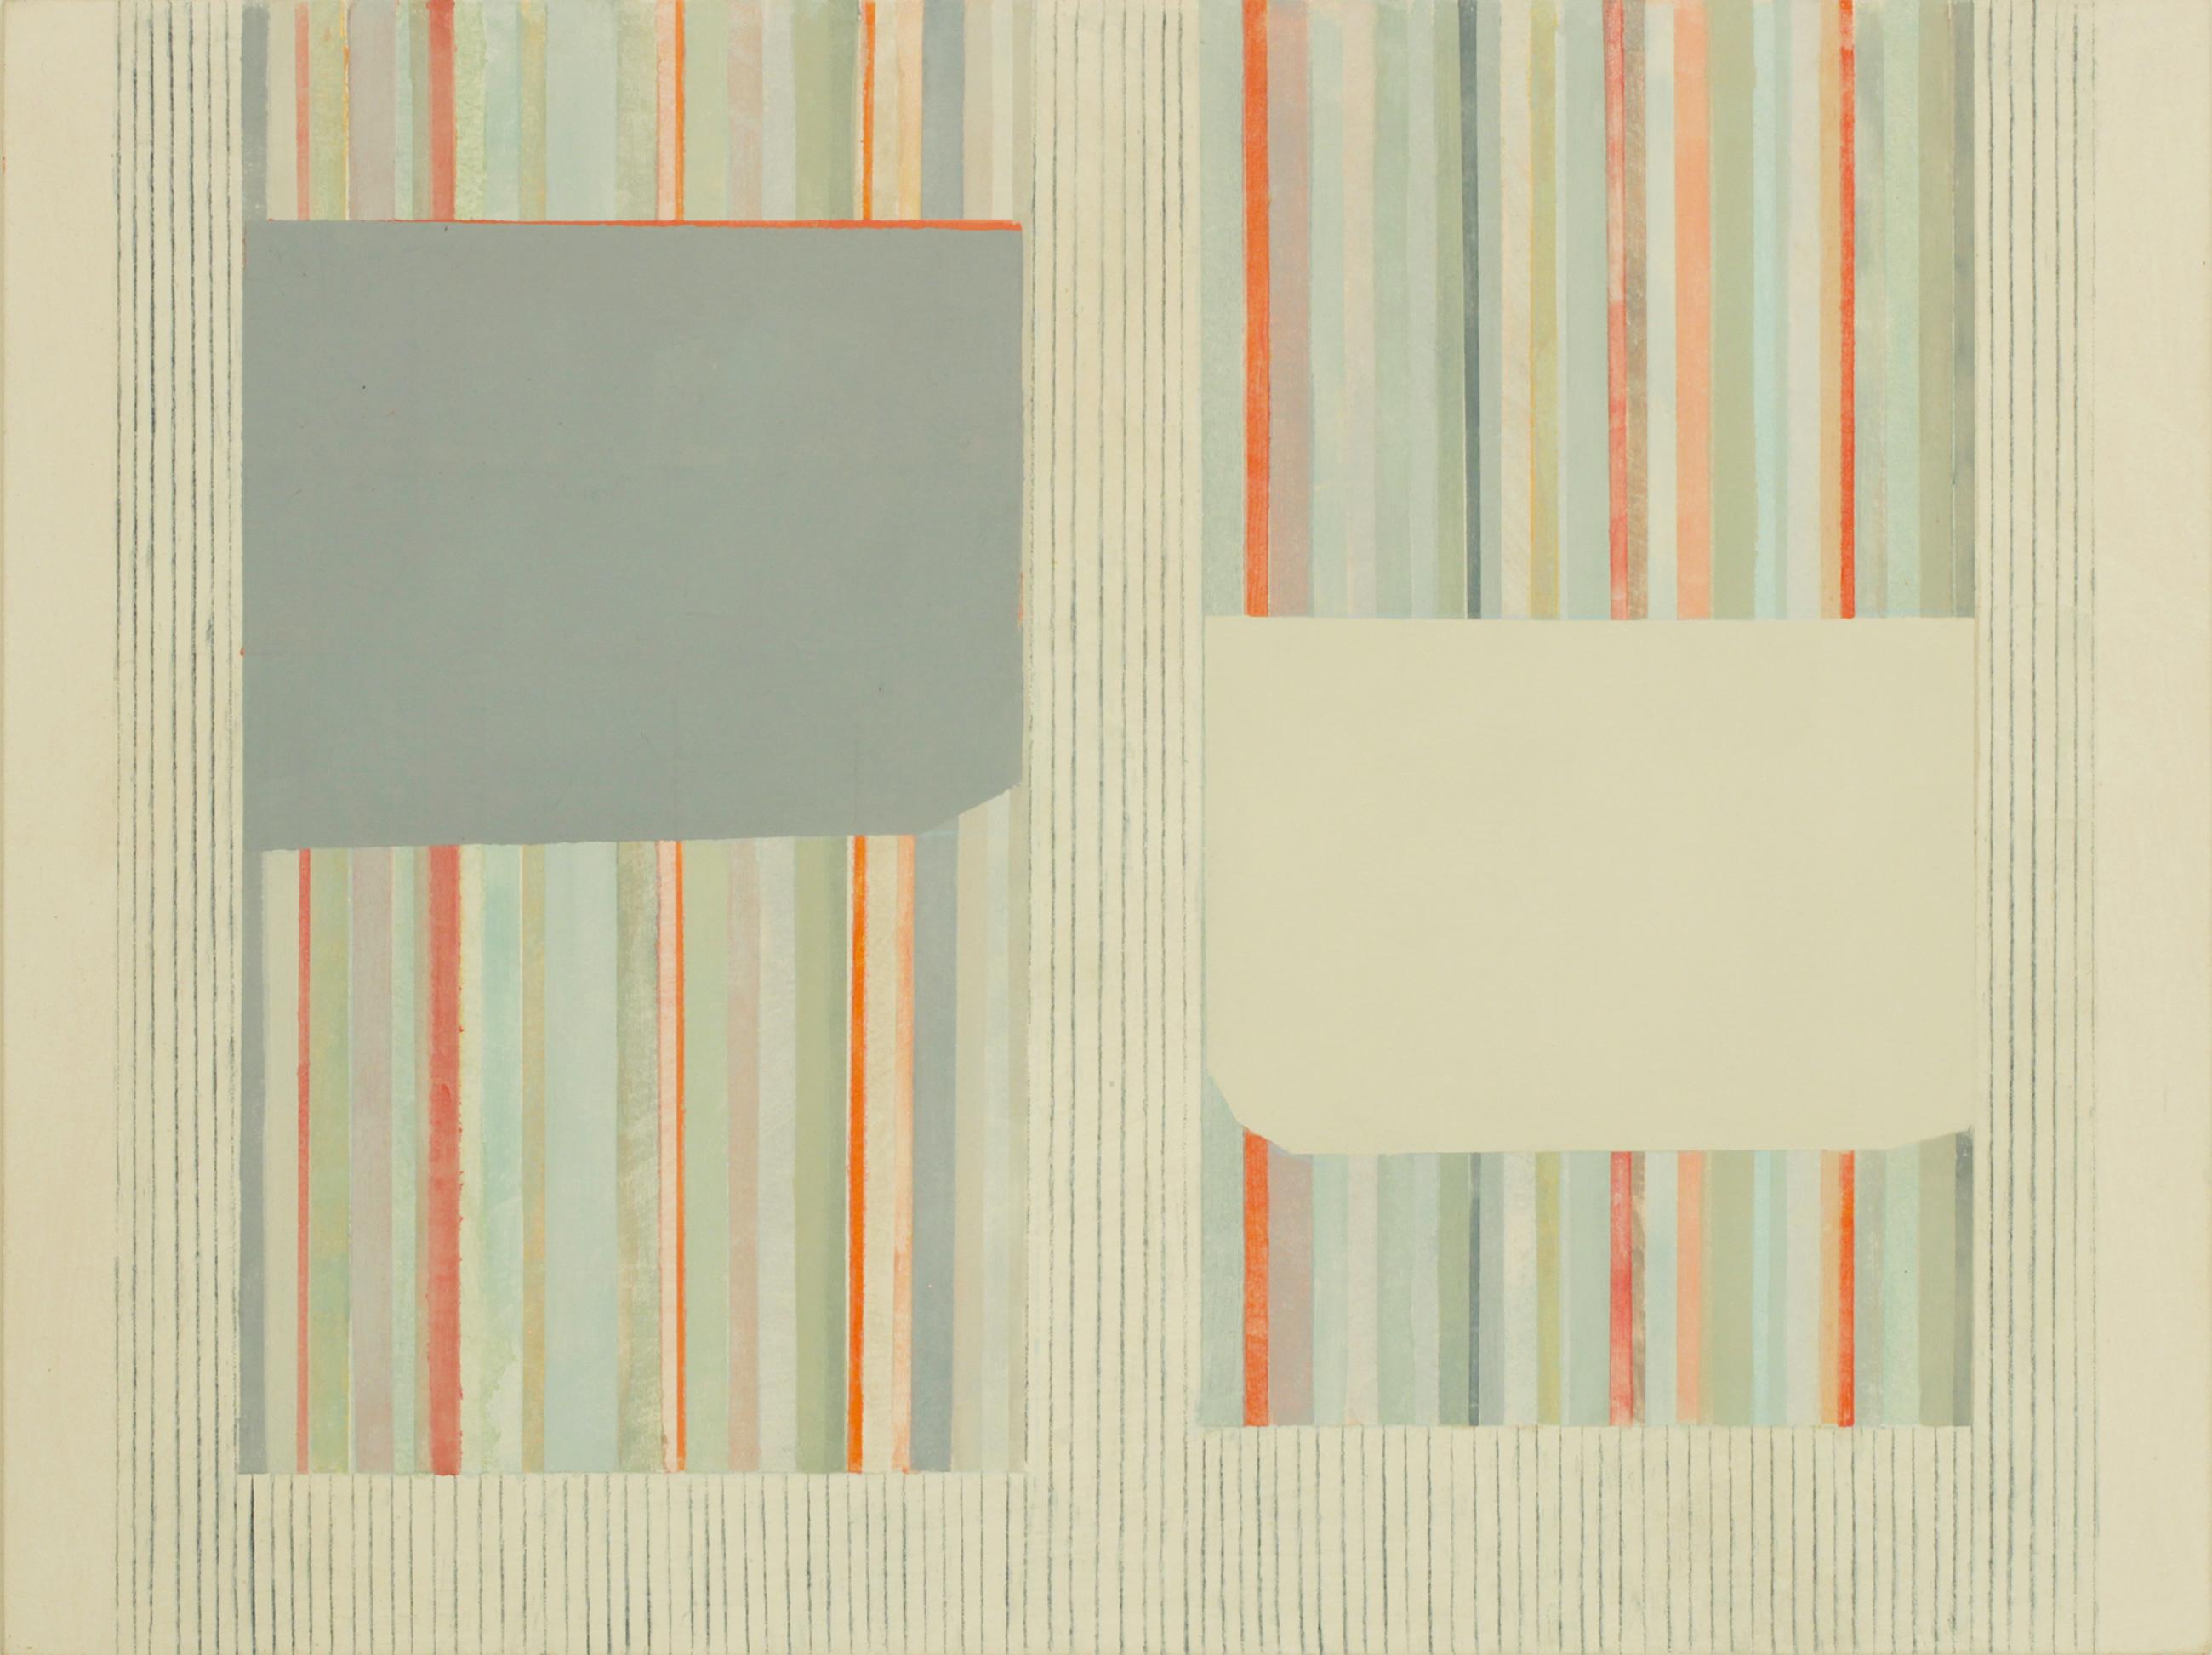 In this abstract painting by Elizabeth Gourlay, clean and precise, carefully ordered stripes and blocks of color in gray, light green, red orange and blue are lively and vibrant against the soft gray beige background. Signed, dated and titled on